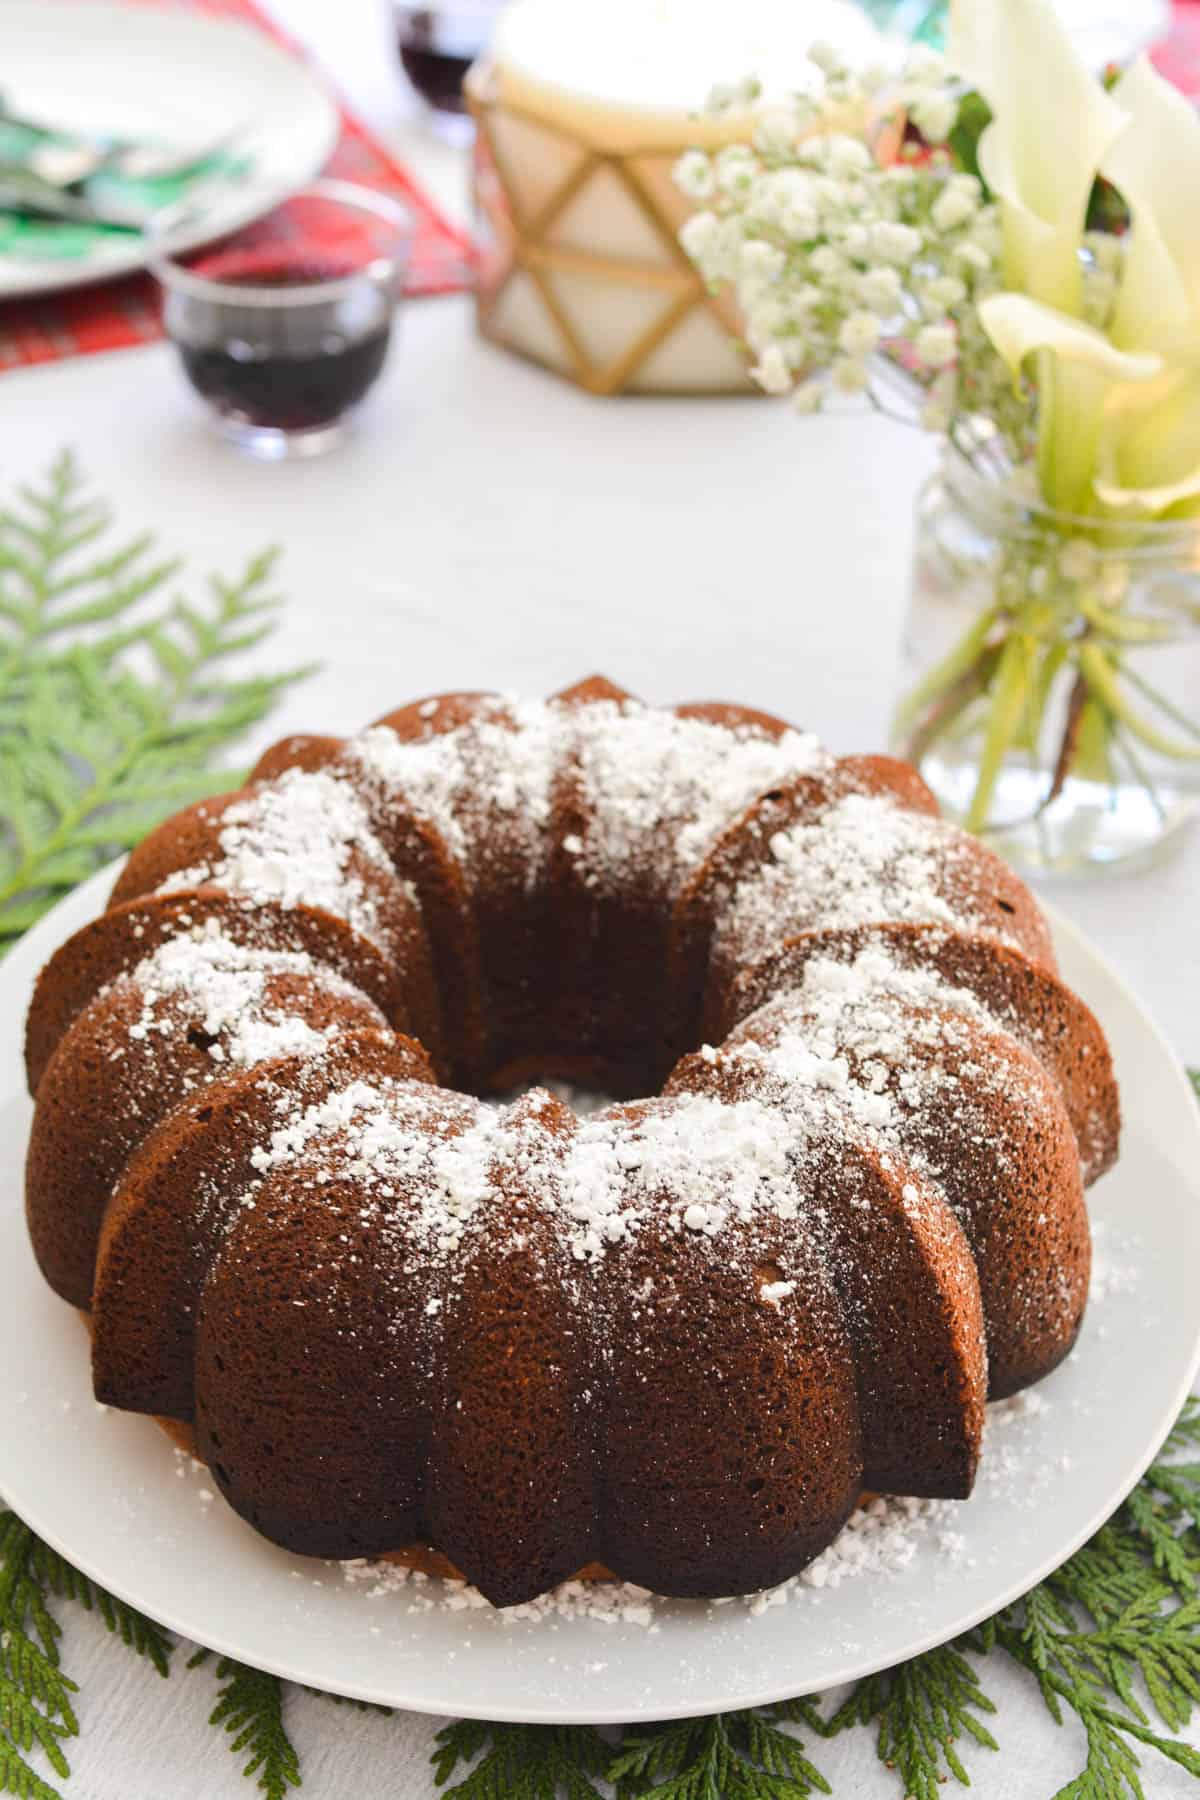 A bundt cake topped with powder sugar on a holiday table.